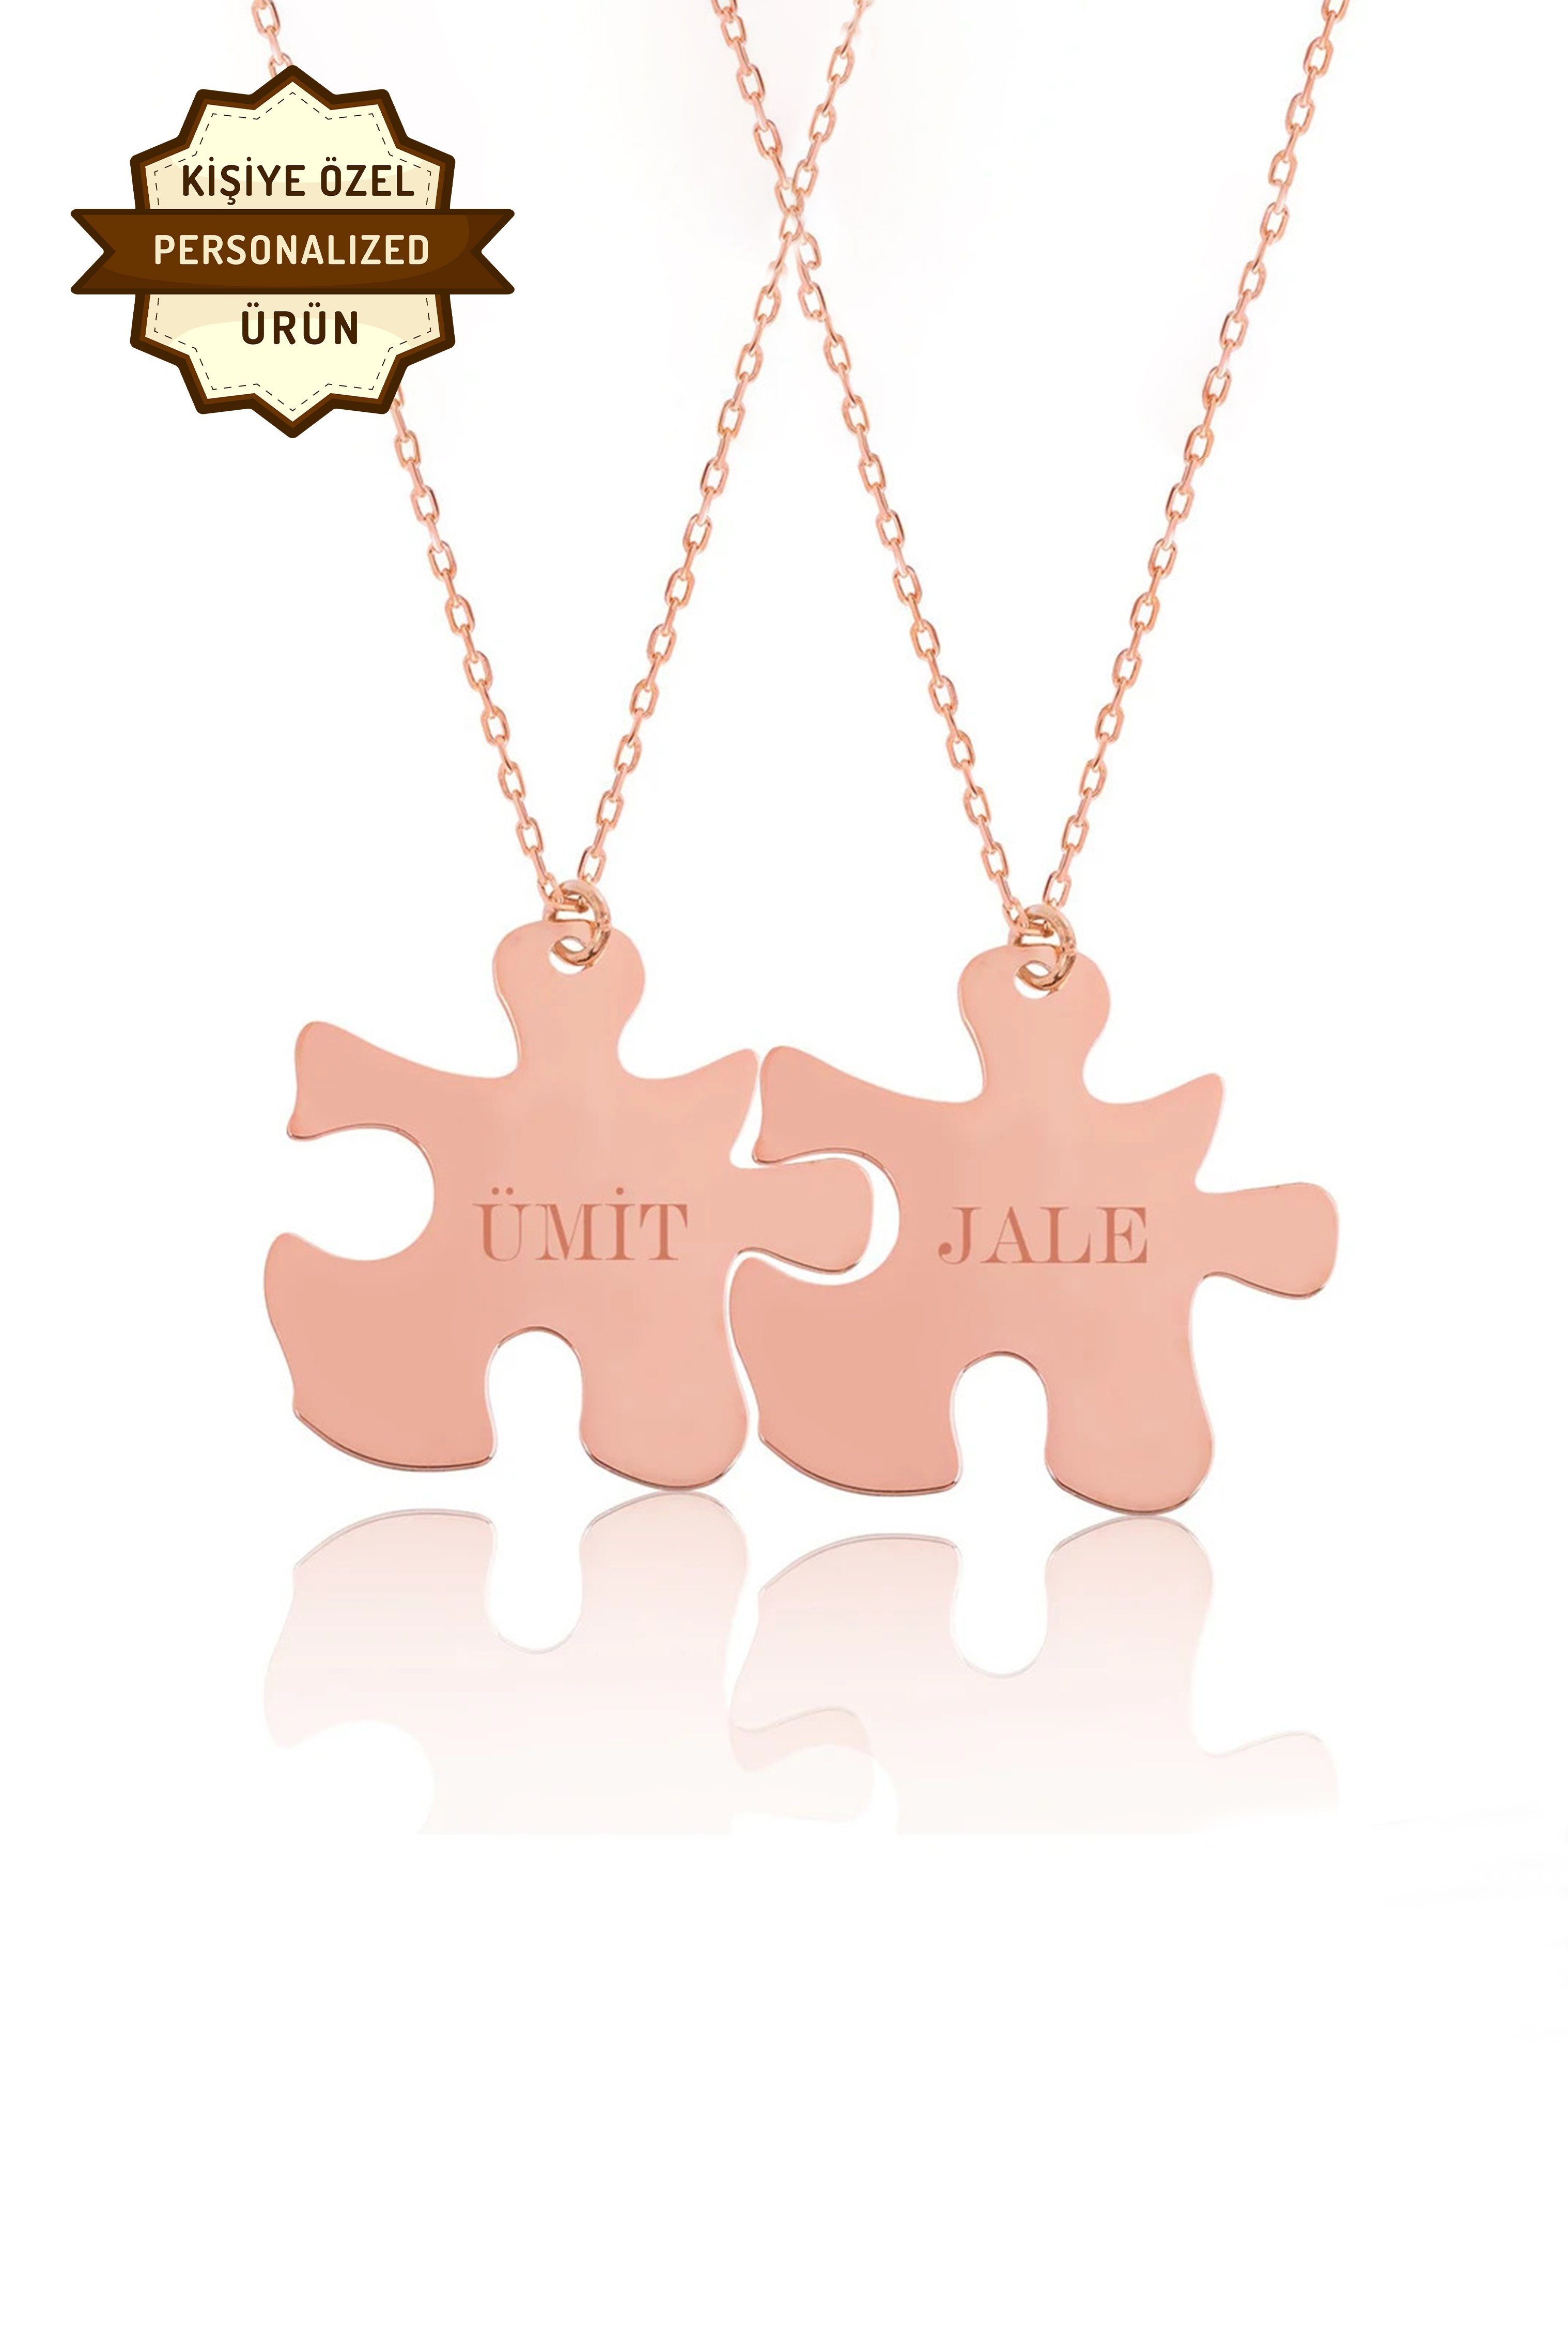 Personalized Puzzle Pieces Couple Matching Necklace